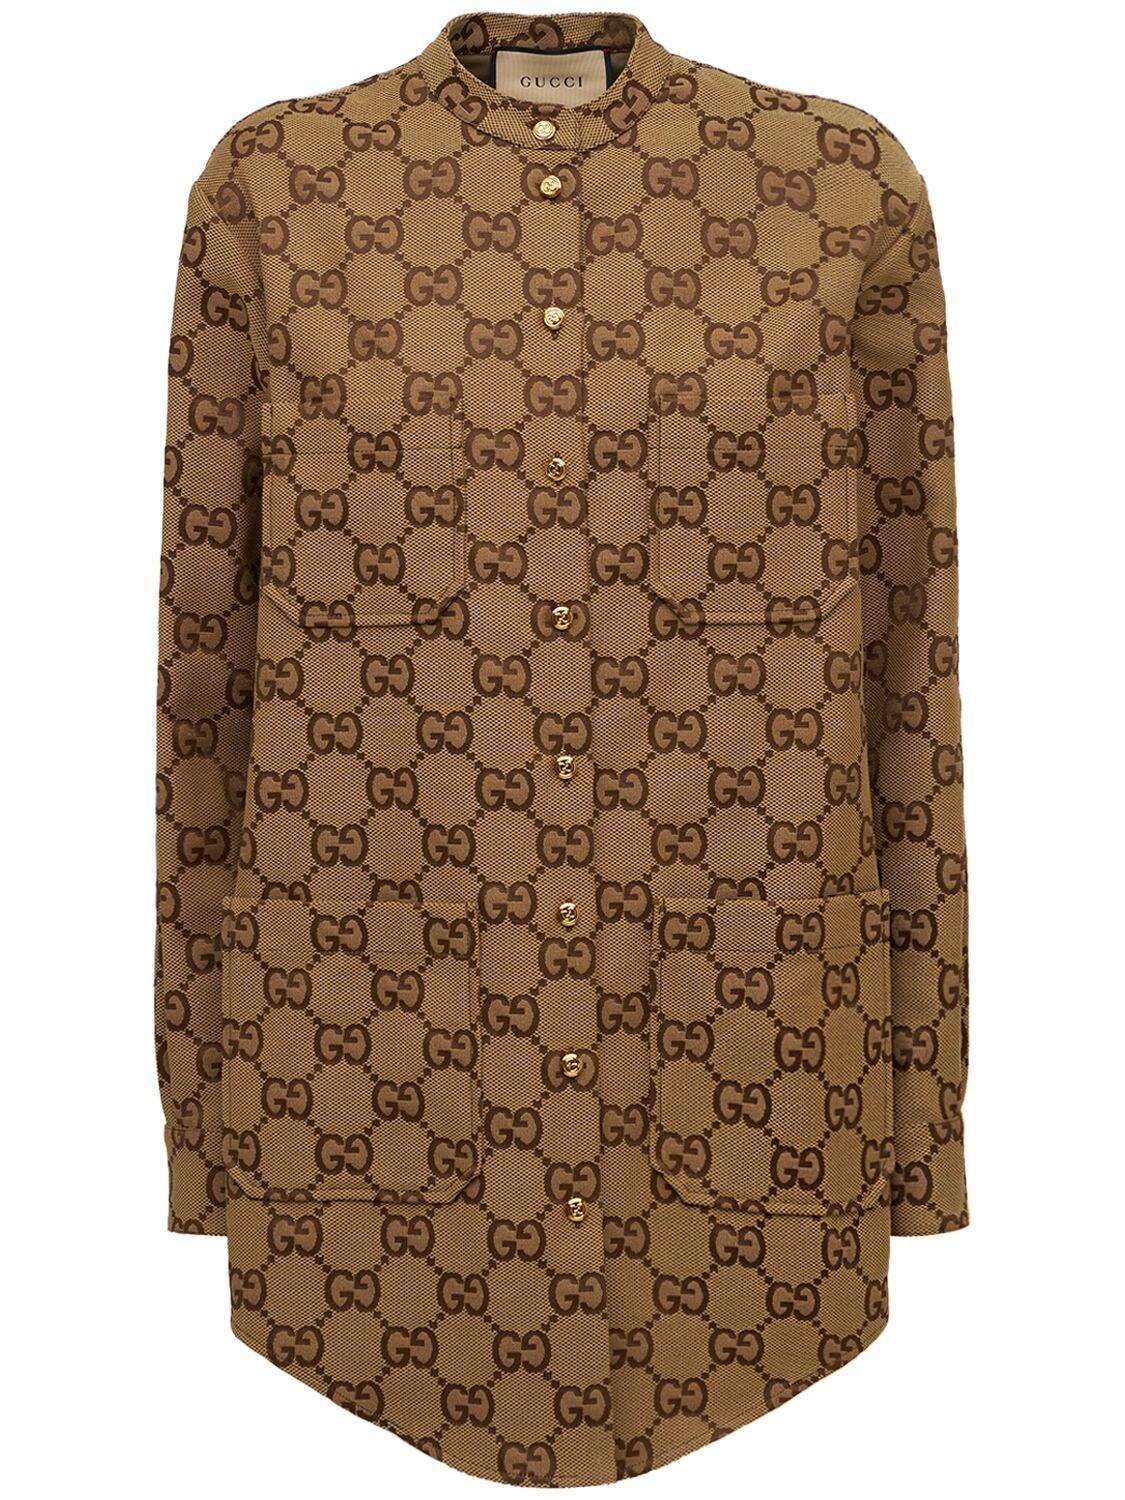 Gucci Maxi Gg Canvas Oversized Shirt in Brown | Lyst